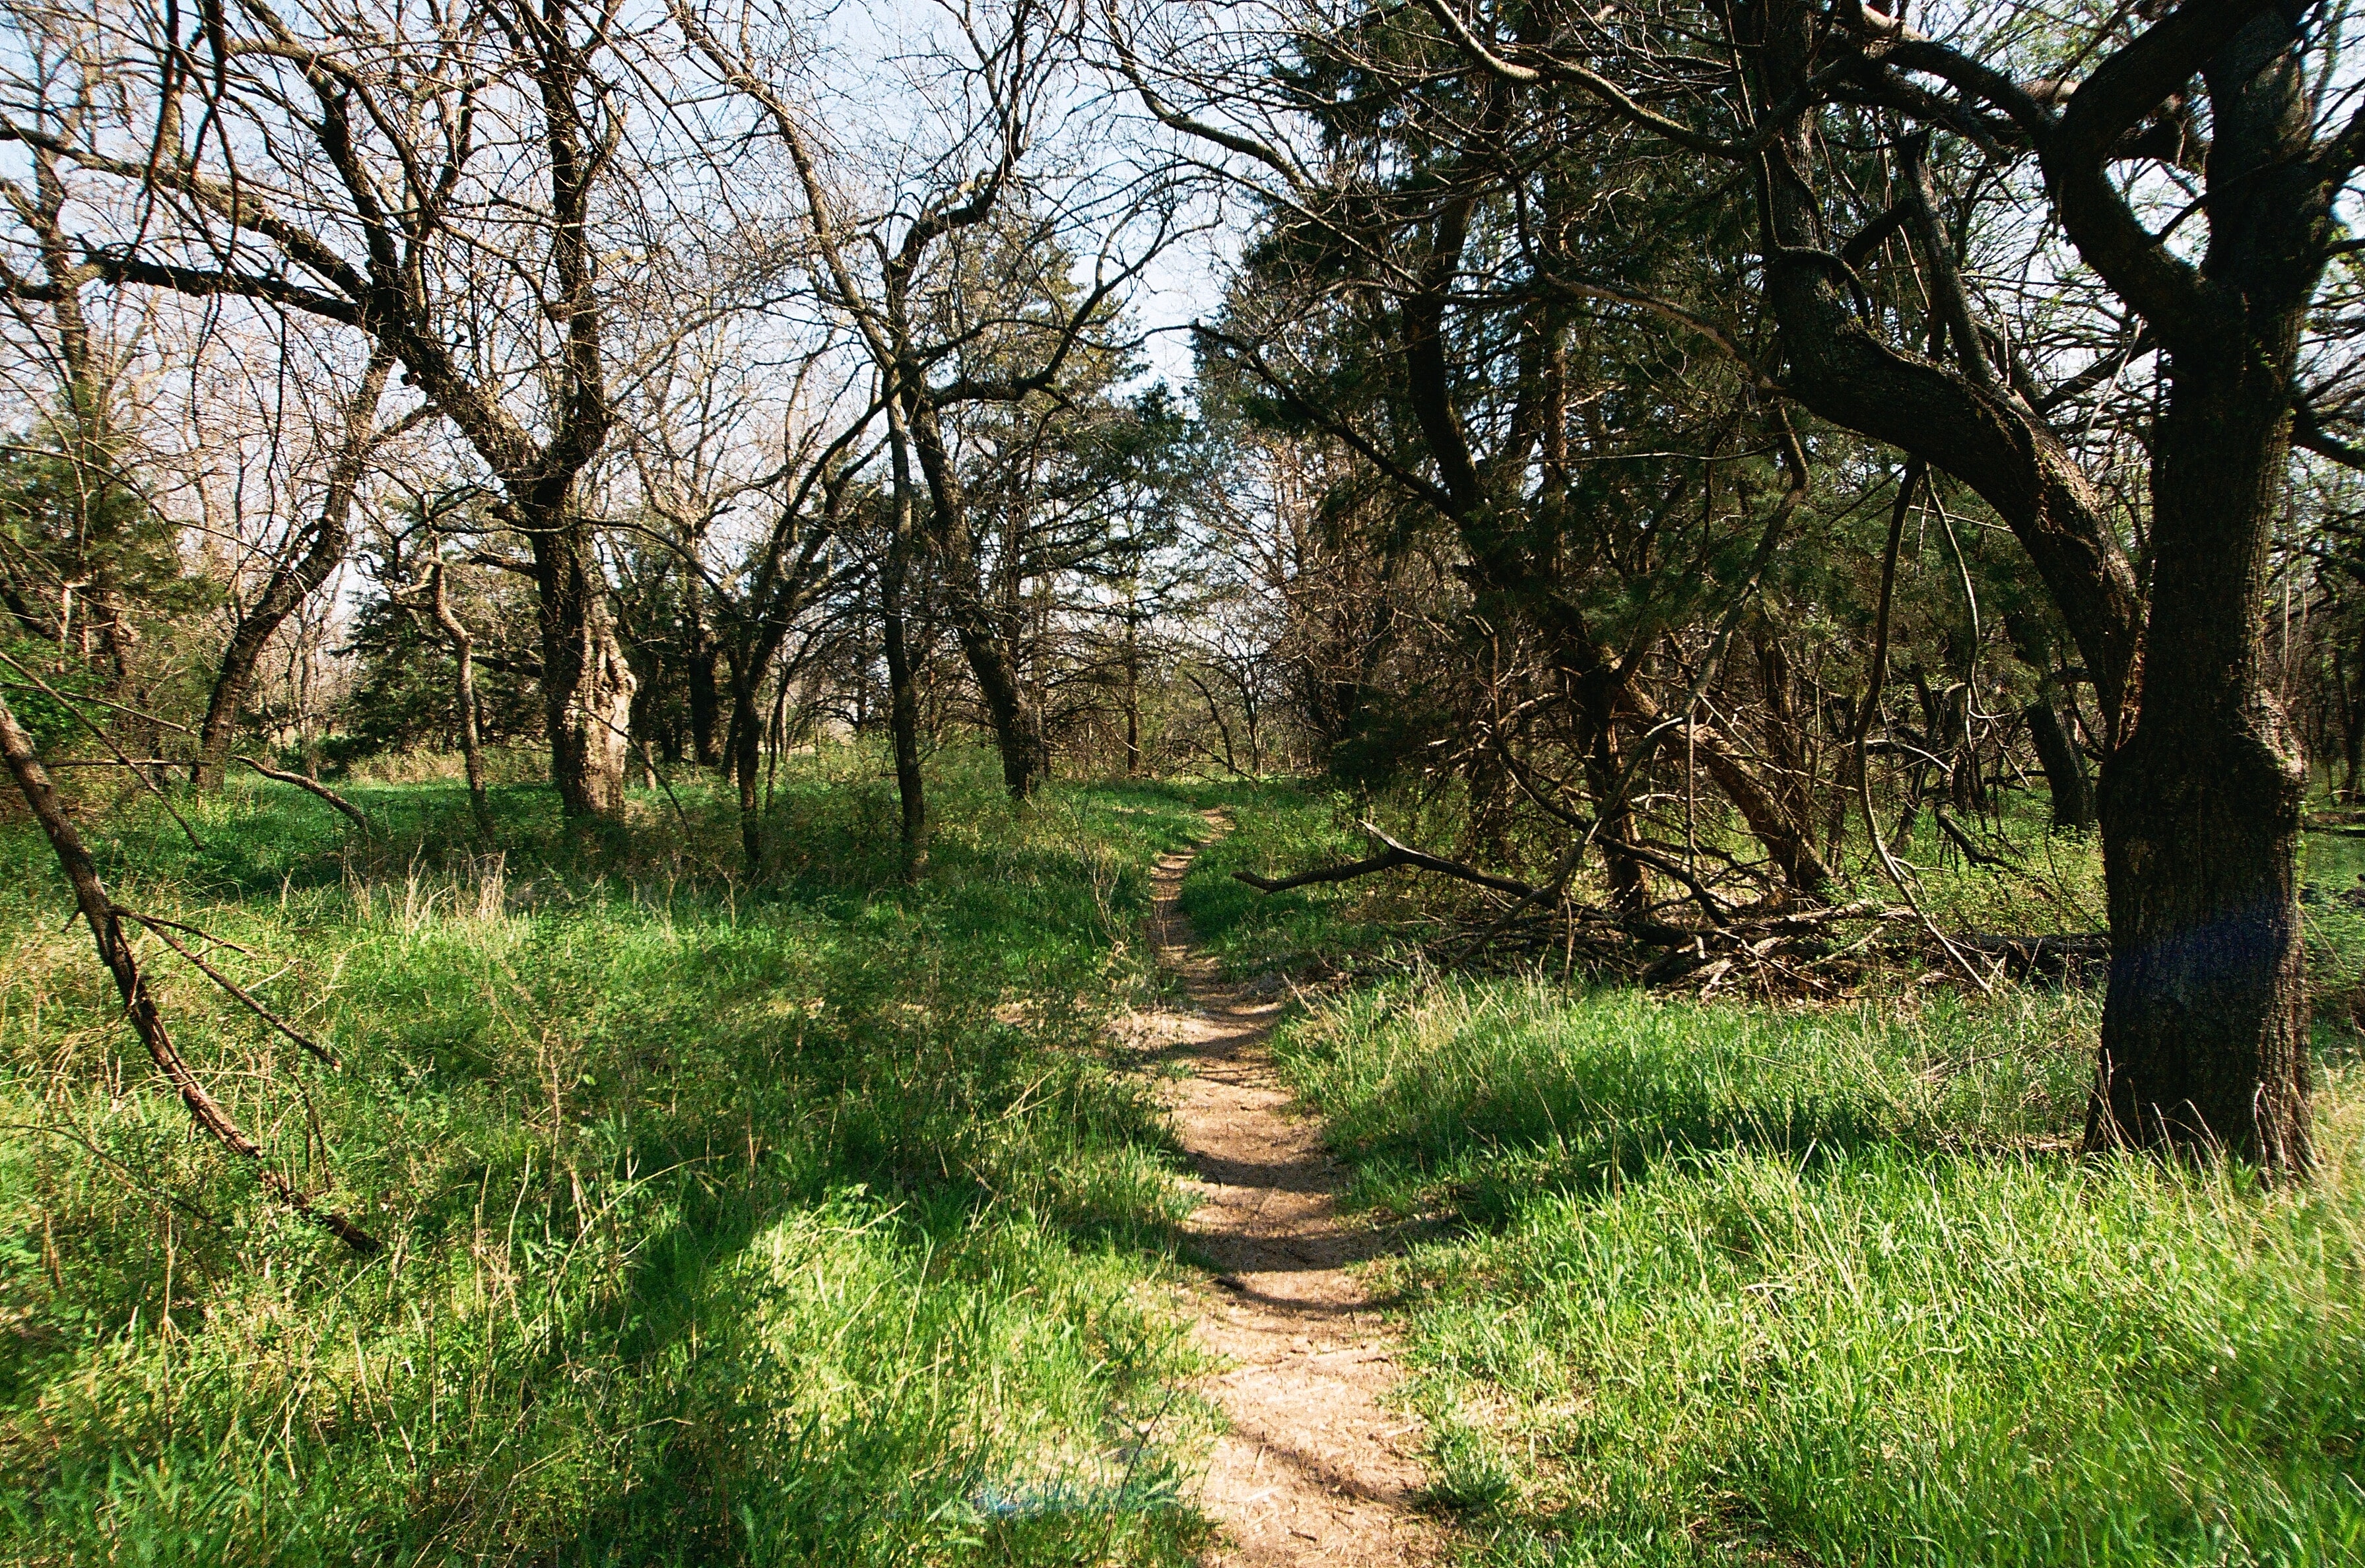 A trail winds in between tall, willowy trees in a grassland